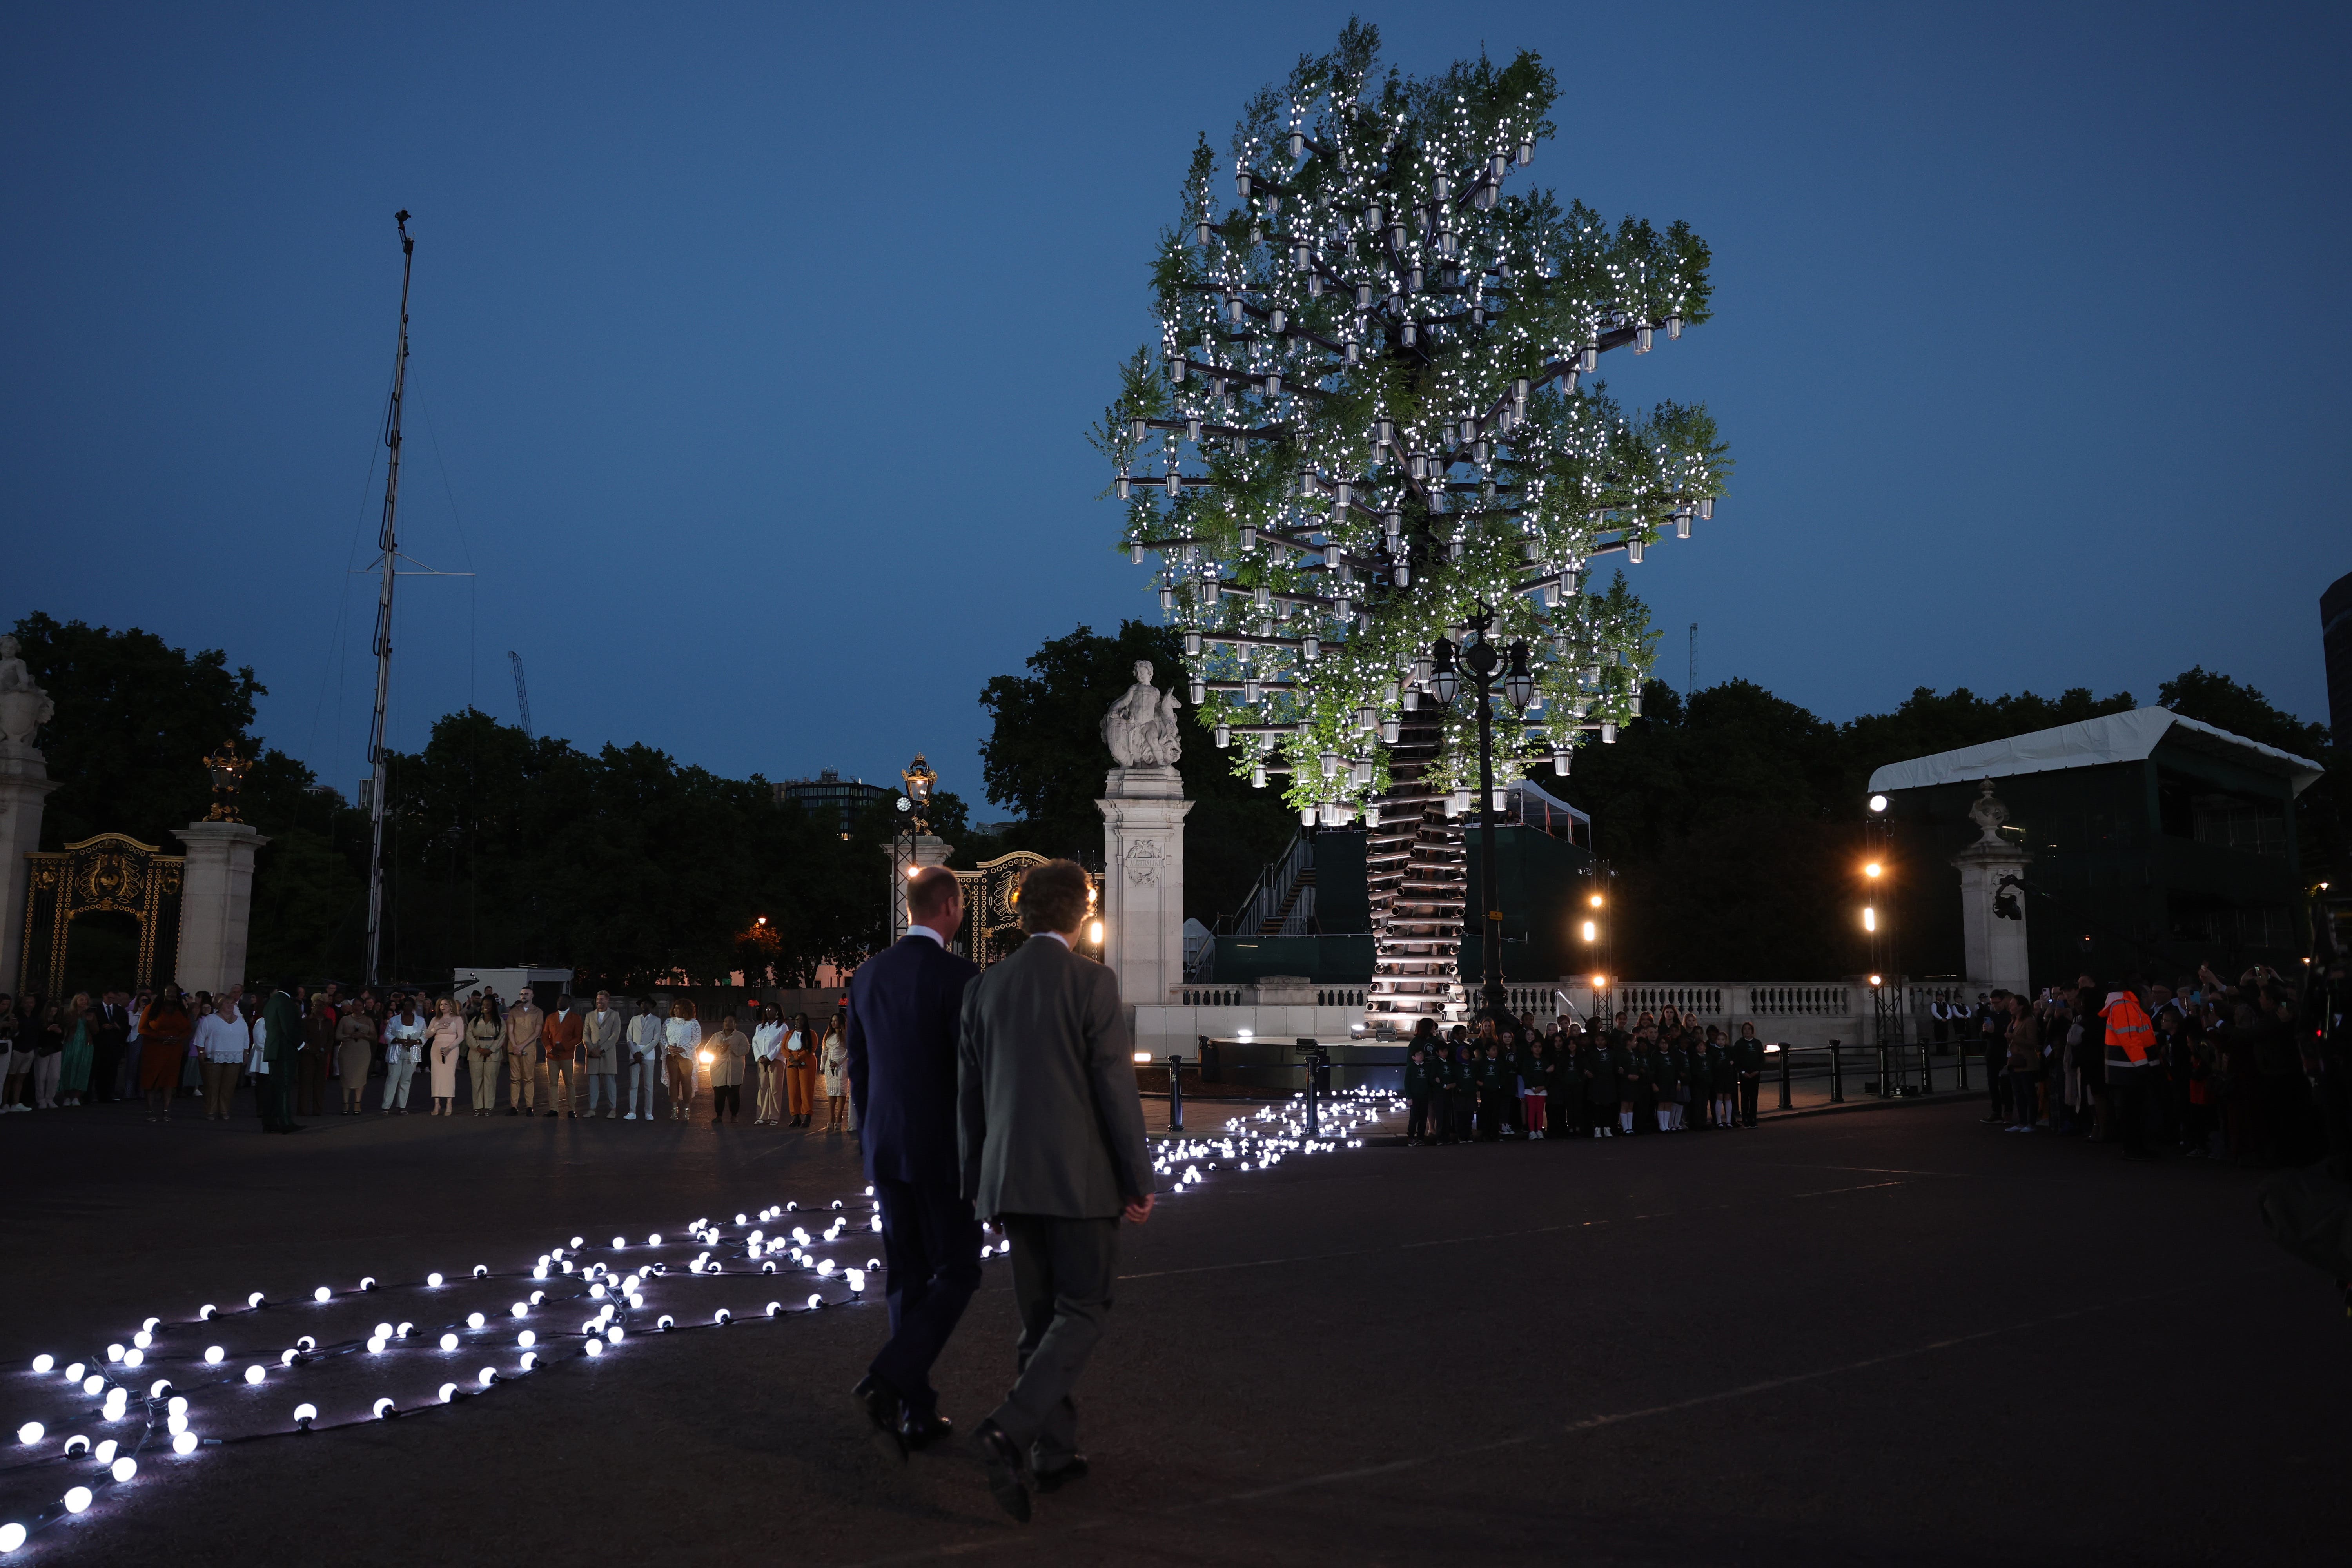 The Duke of Cambridge and Sir Nicholas Bacon attending the lighting of the Principal Beacon at the Tree of Trees sculpture outside Buckingham Palace, London, on day one of the Platinum Jubilee celebrations on June 2 2022 (Chris Jackson/PA)